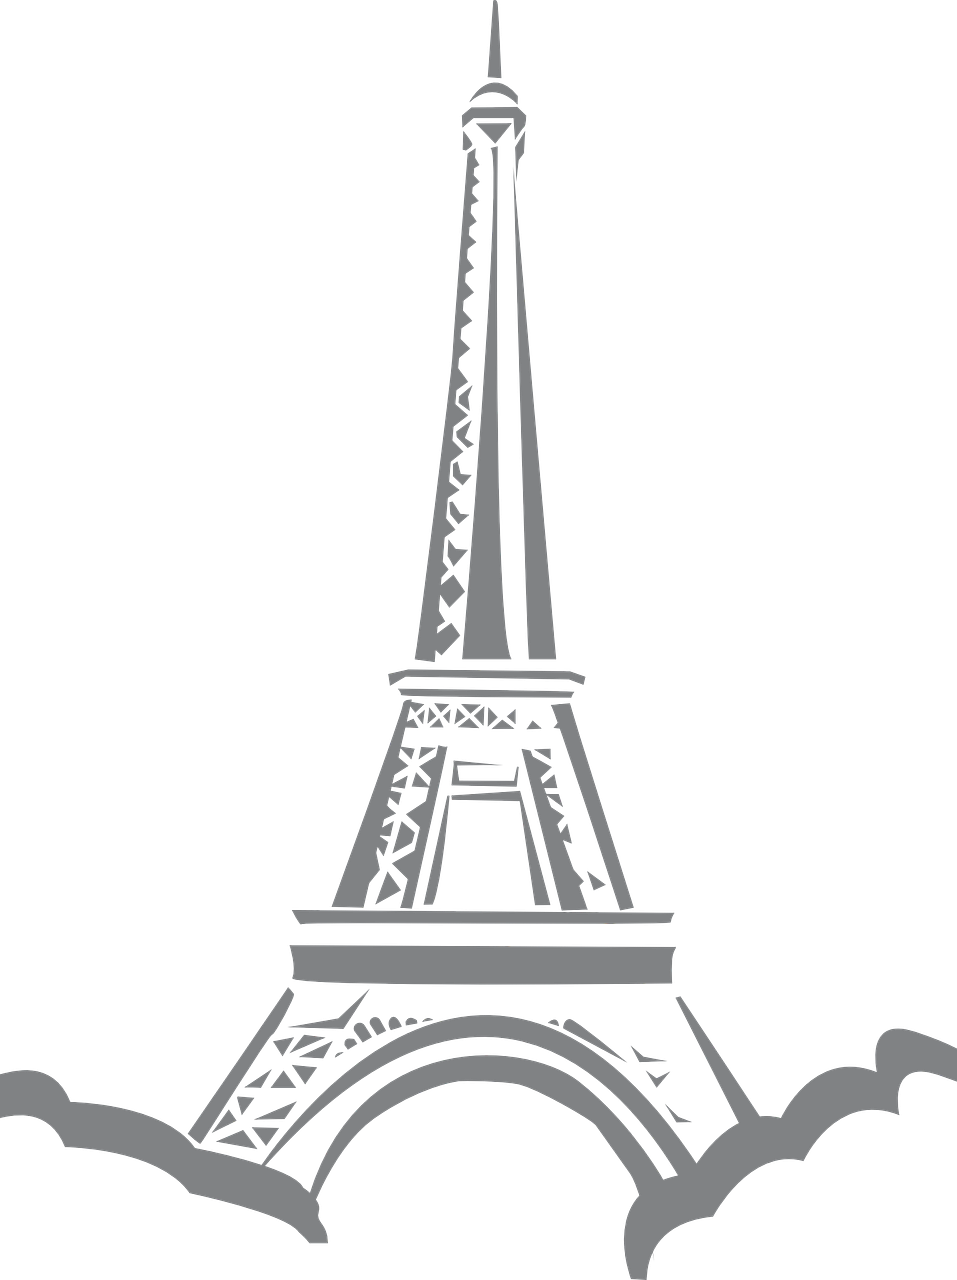 eiffel tower,eiffel,tower,paris,landmark,architecture,symbol,monument,urban,france,free vector graphics,free pictures, free photos, free images, royalty free, free illustrations, public domain